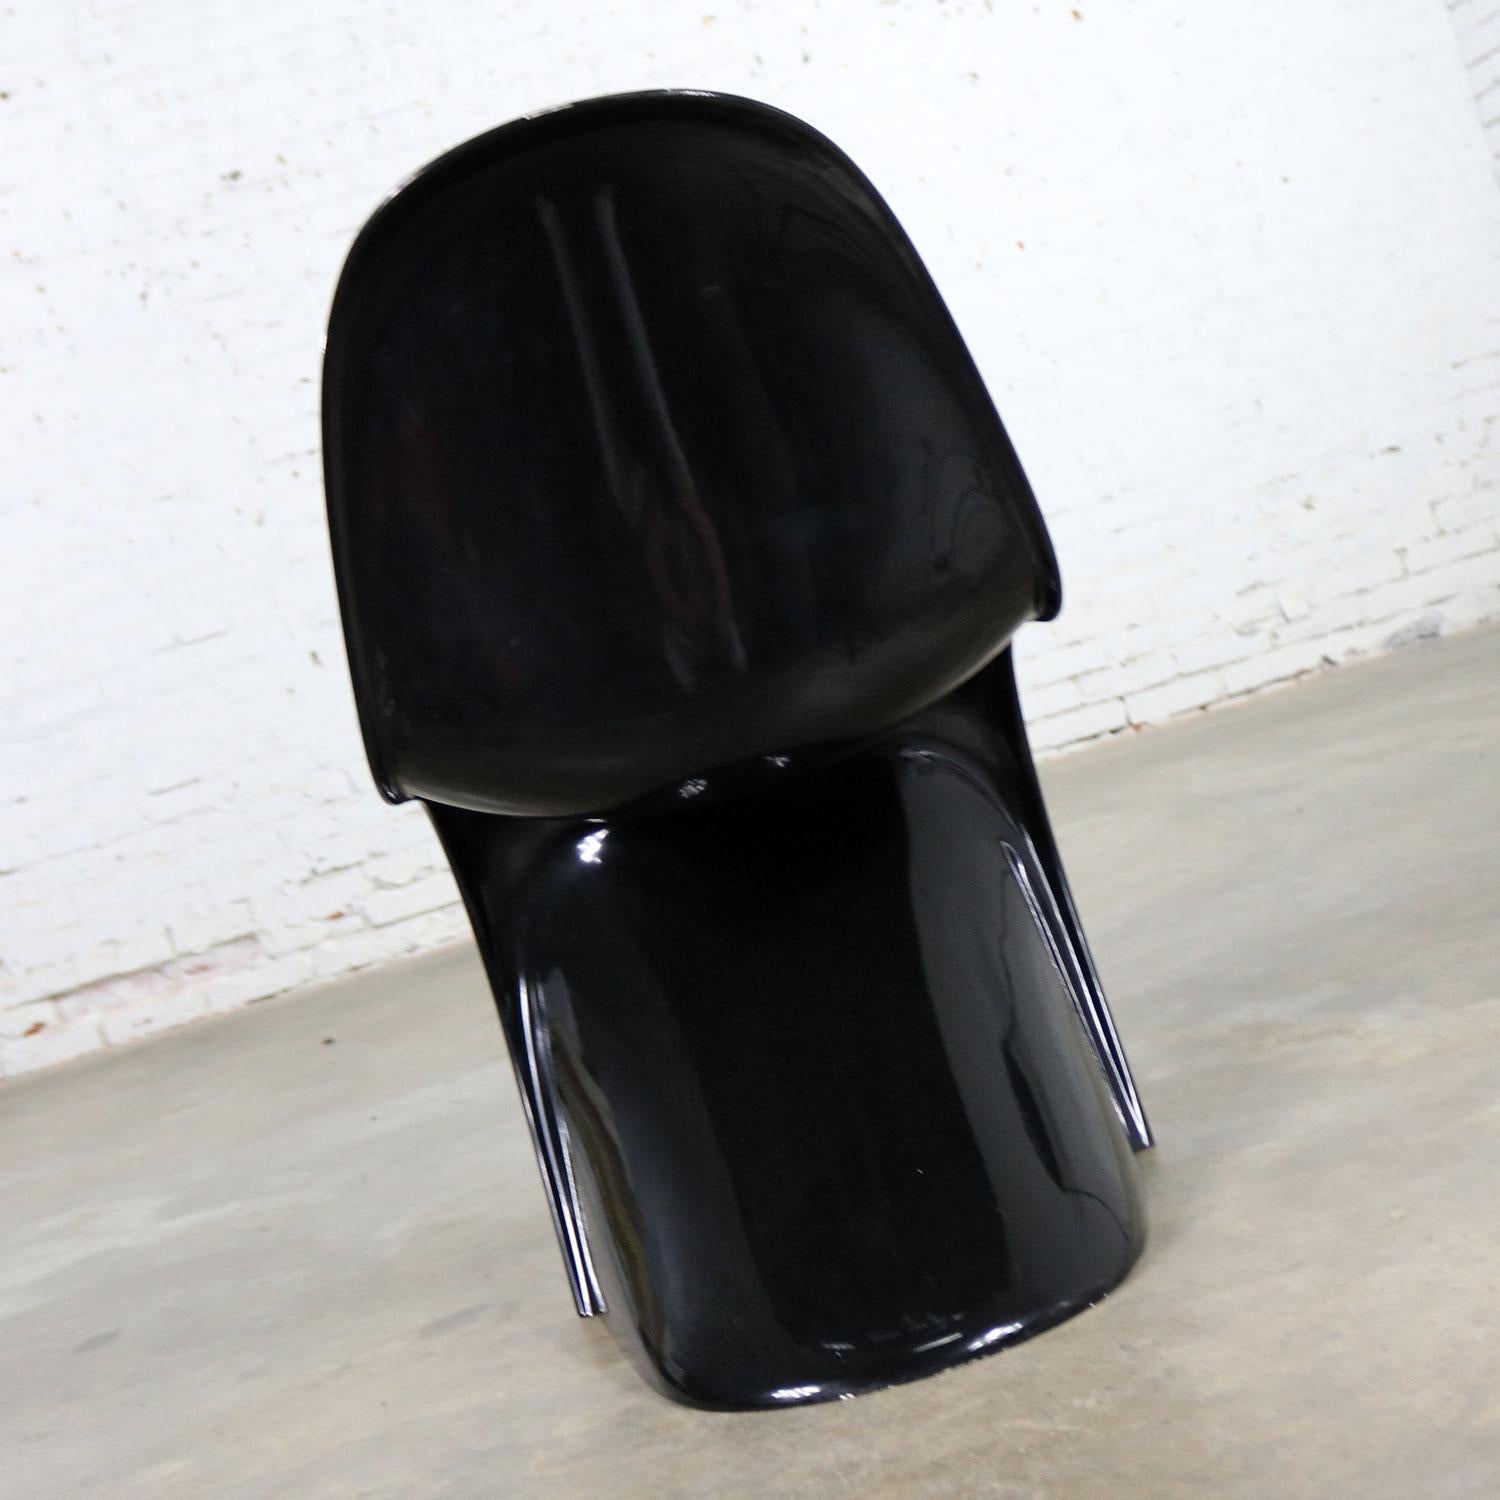 Mid-Century Modern Gloss Black Verner Panton Chair Classic Molded S Chair by Vitra Signed